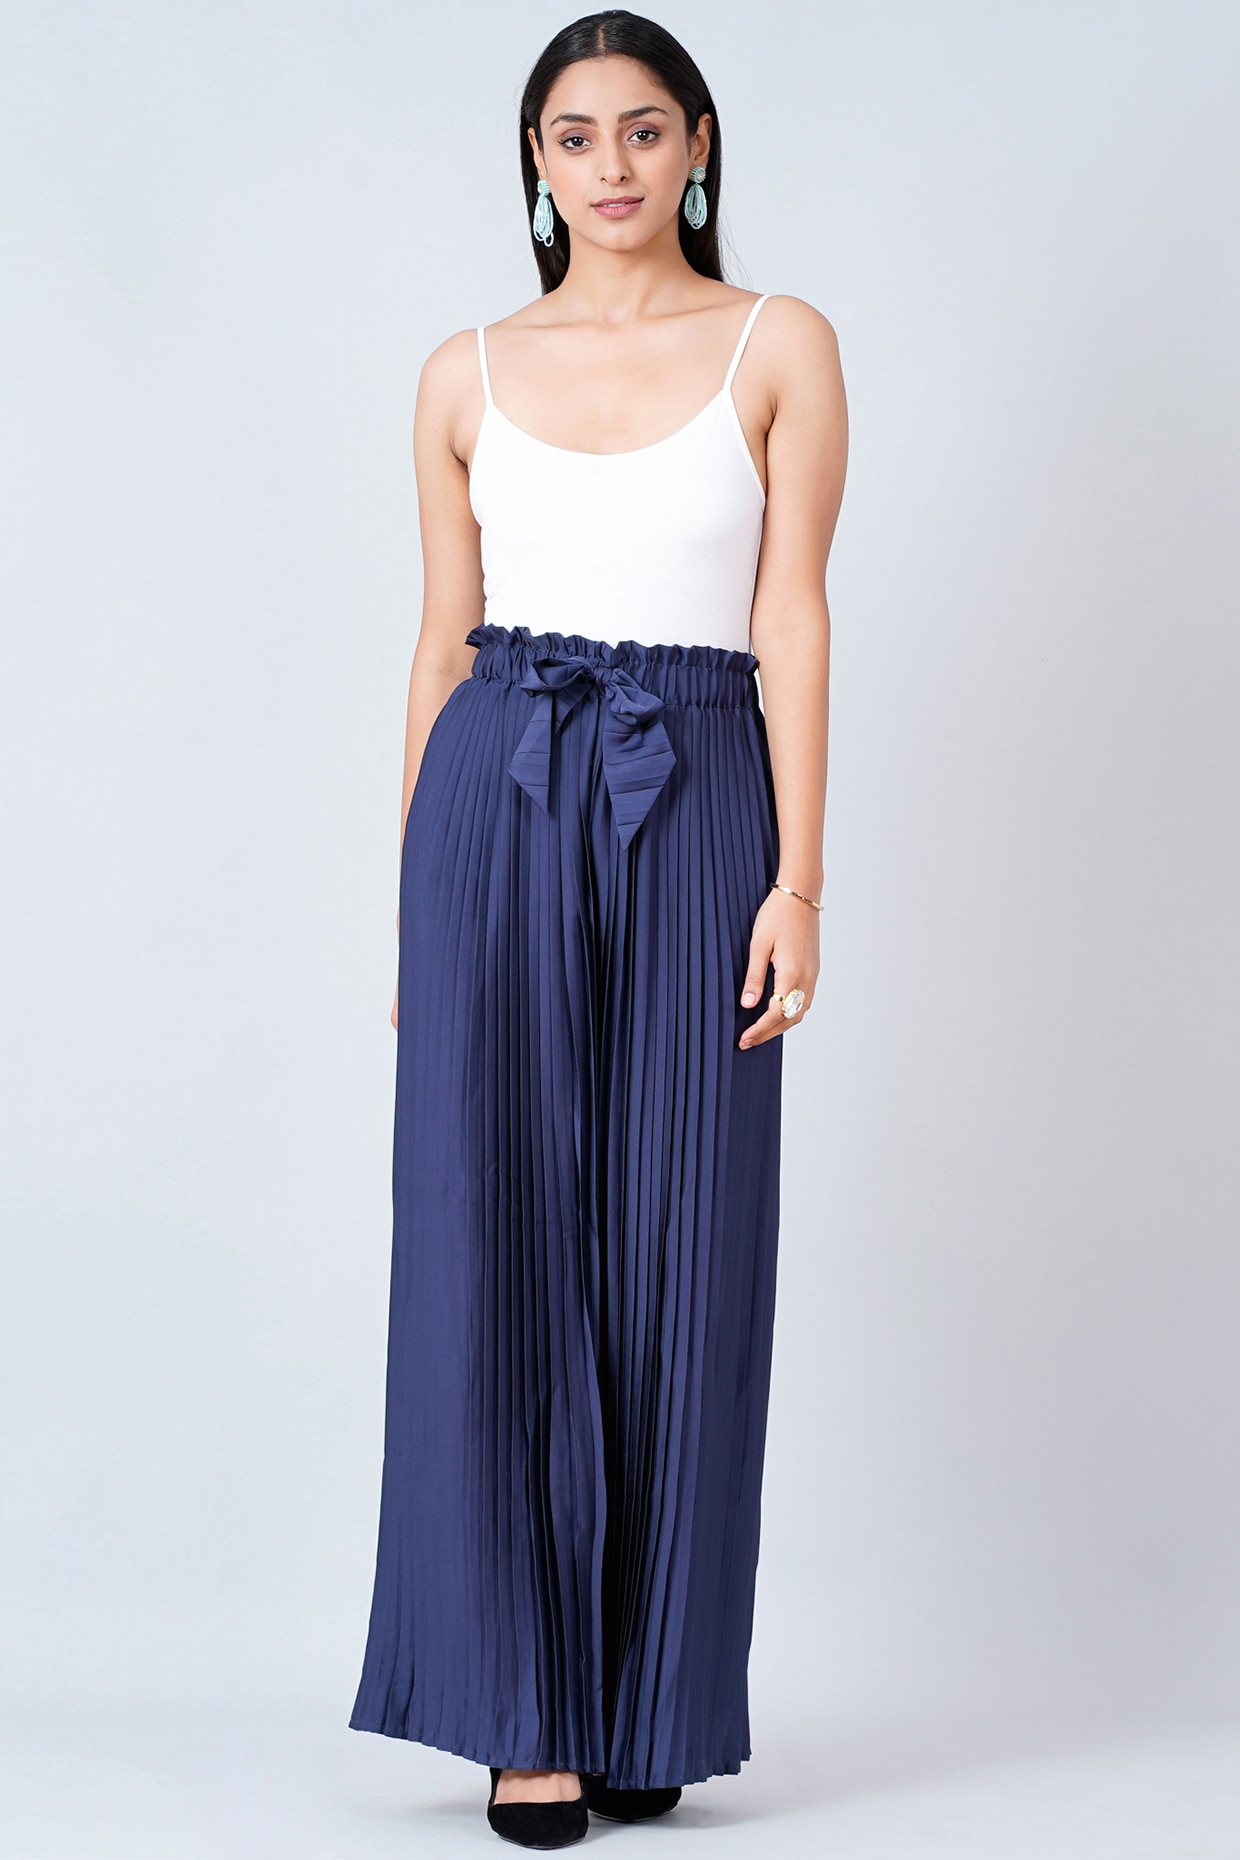 TNQ Women's Solid Palazzo Pants 34 Royal Blue at Amazon Women's Clothing  store